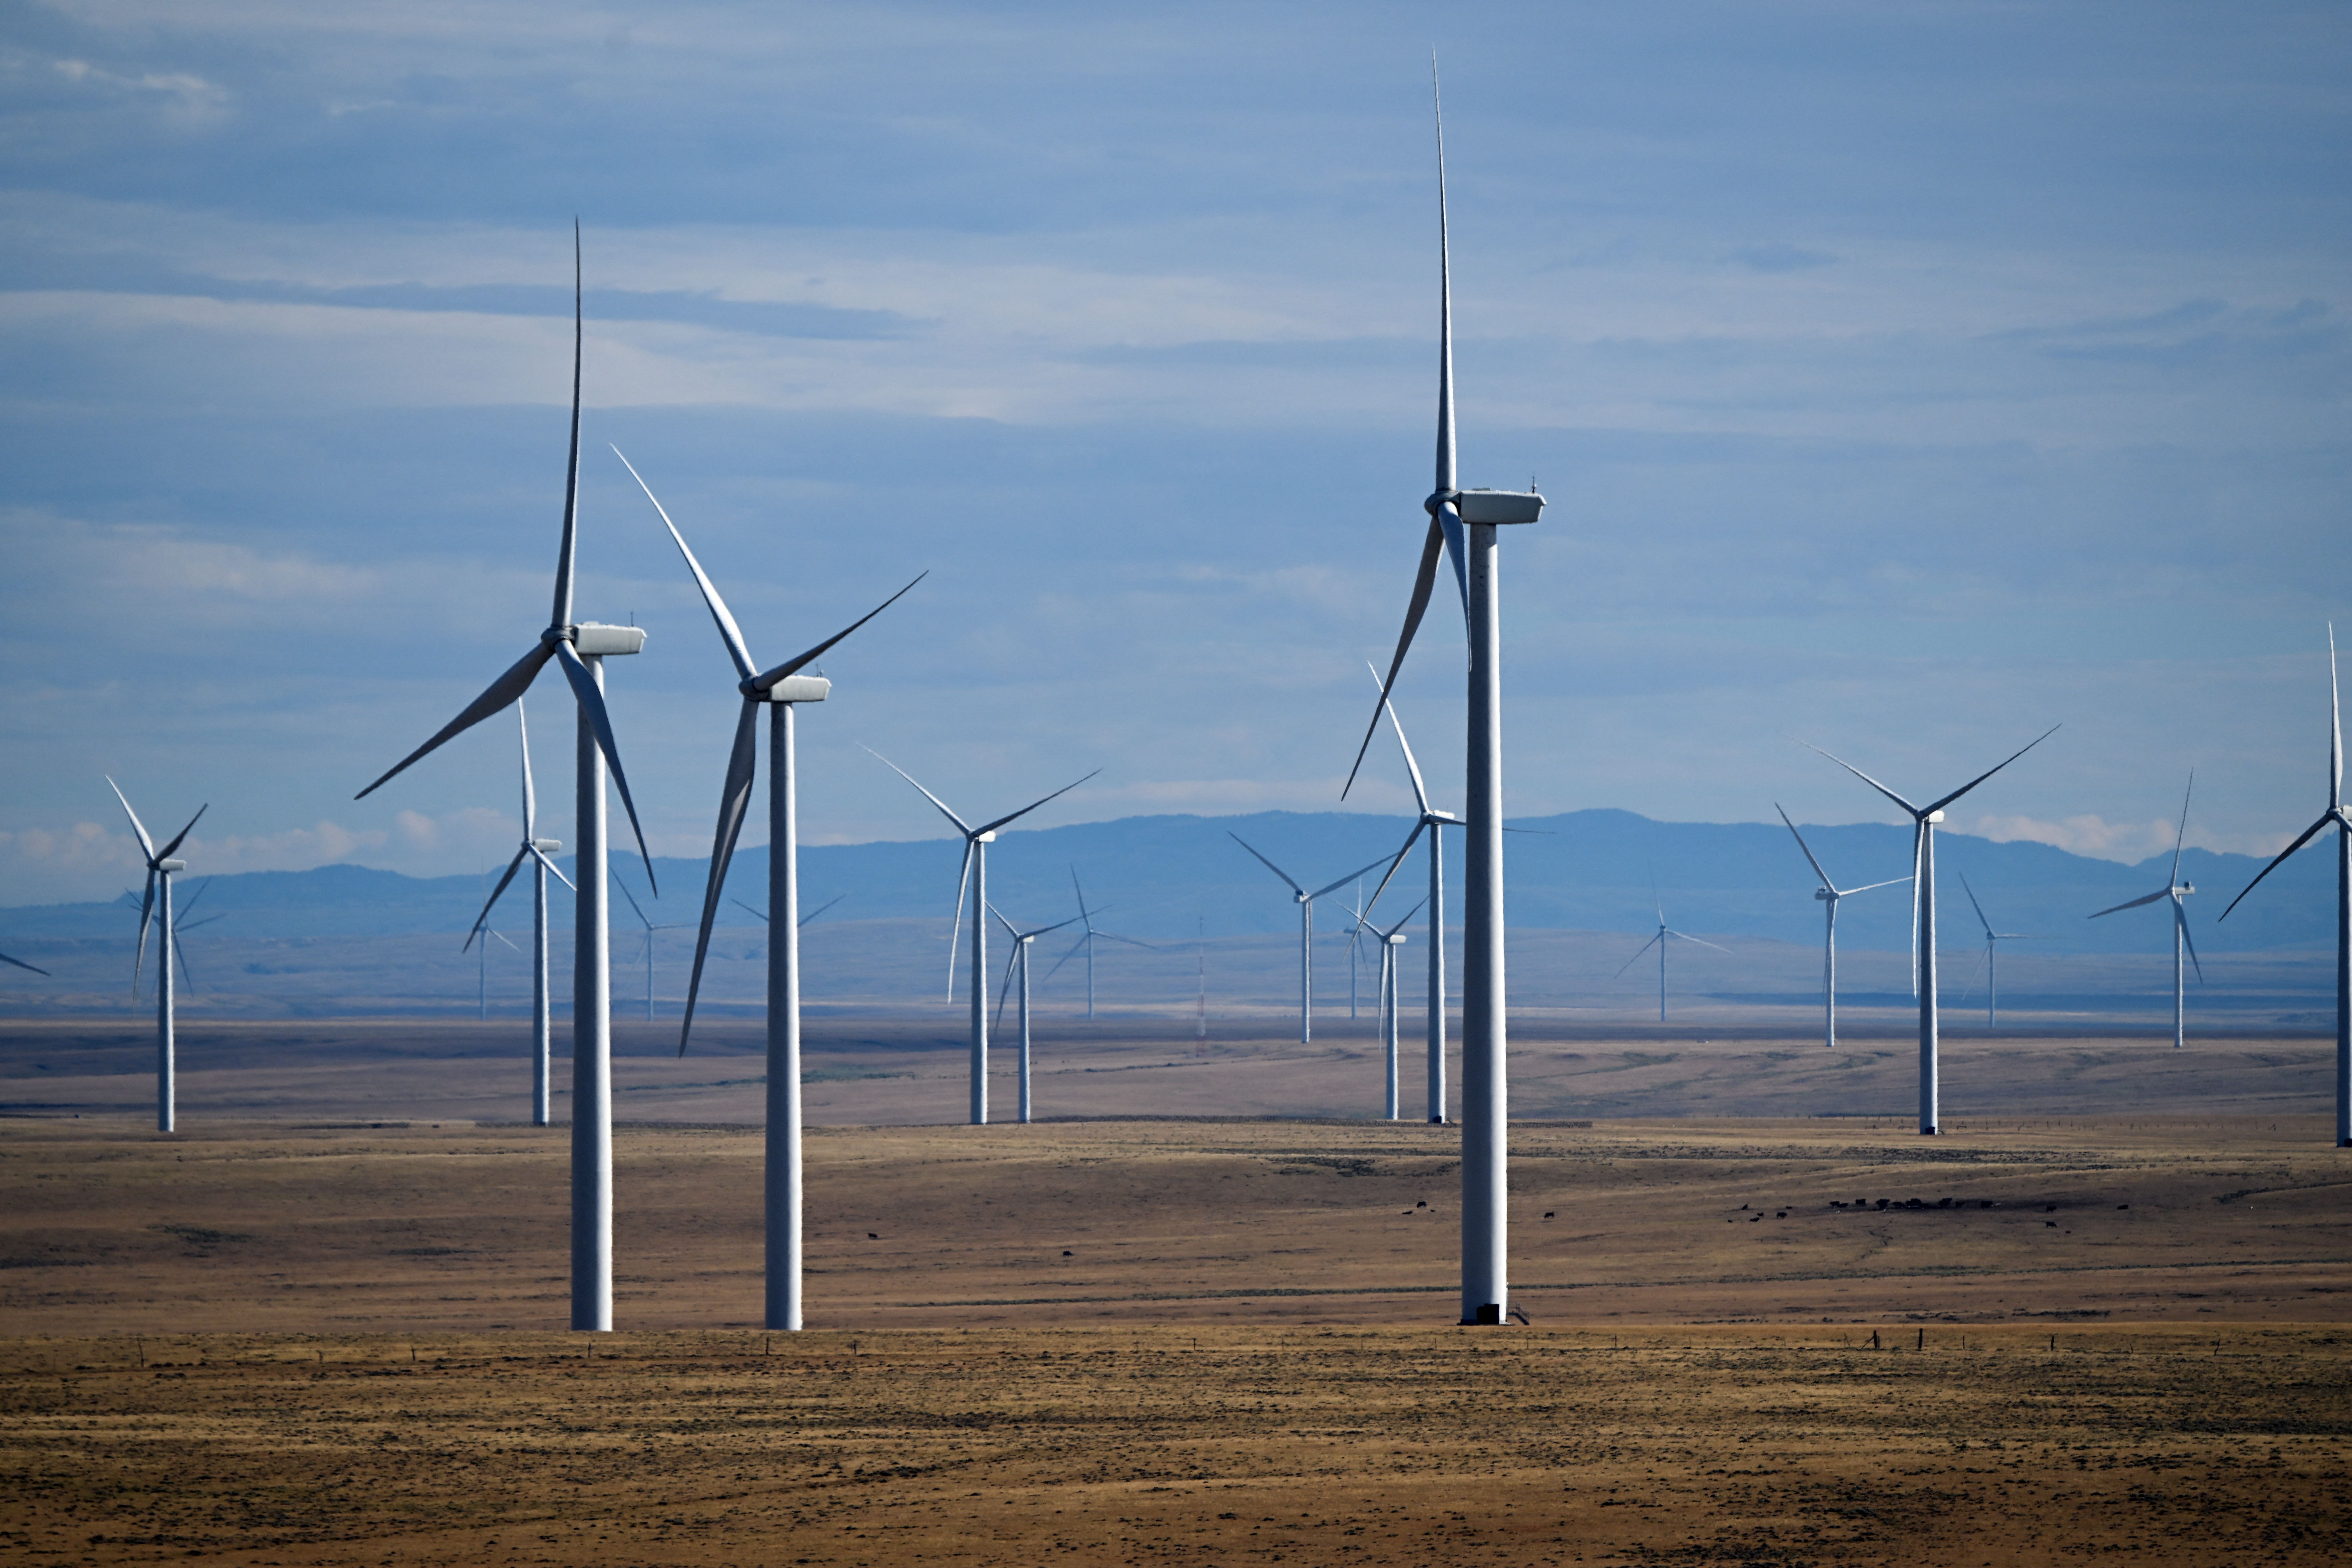 Wind electric power generation turbines generate electricity outside Medicine Bow, Wyoming in August 2022. Credit: Patrick T. Fallon/ AFP via Getty Images.